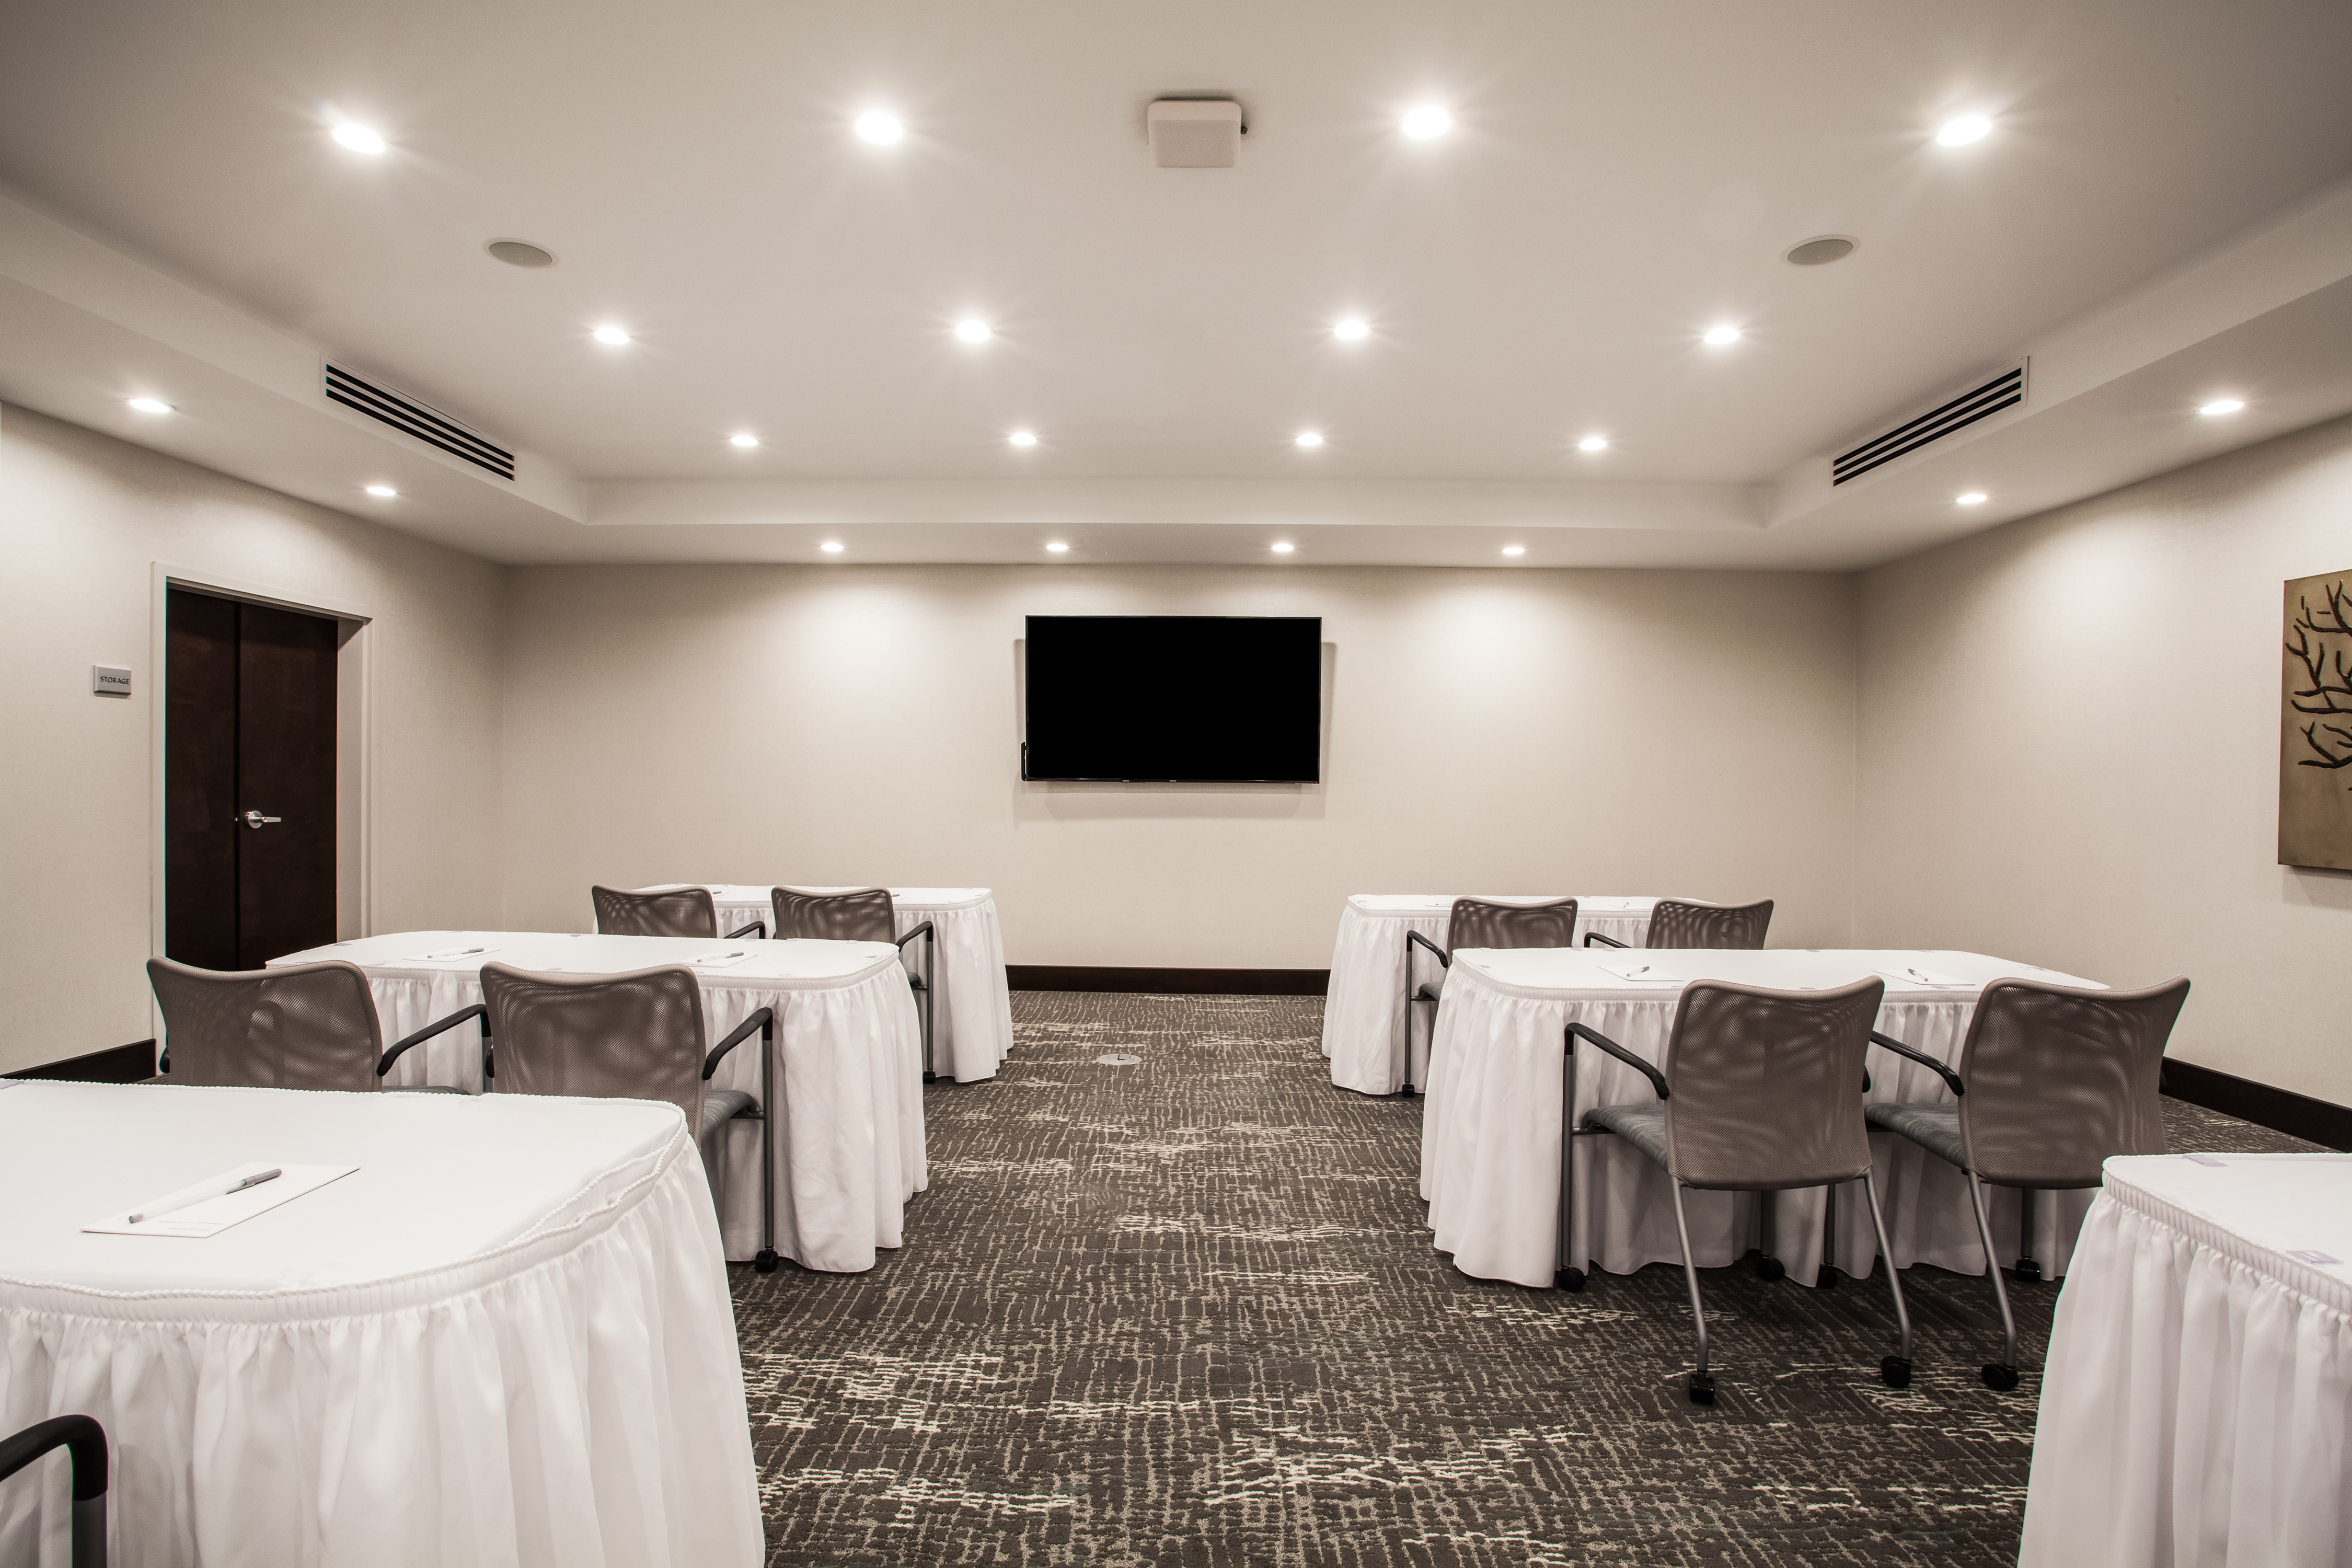 Meeting Room Classroom Setup with Wall Mounted HDTV